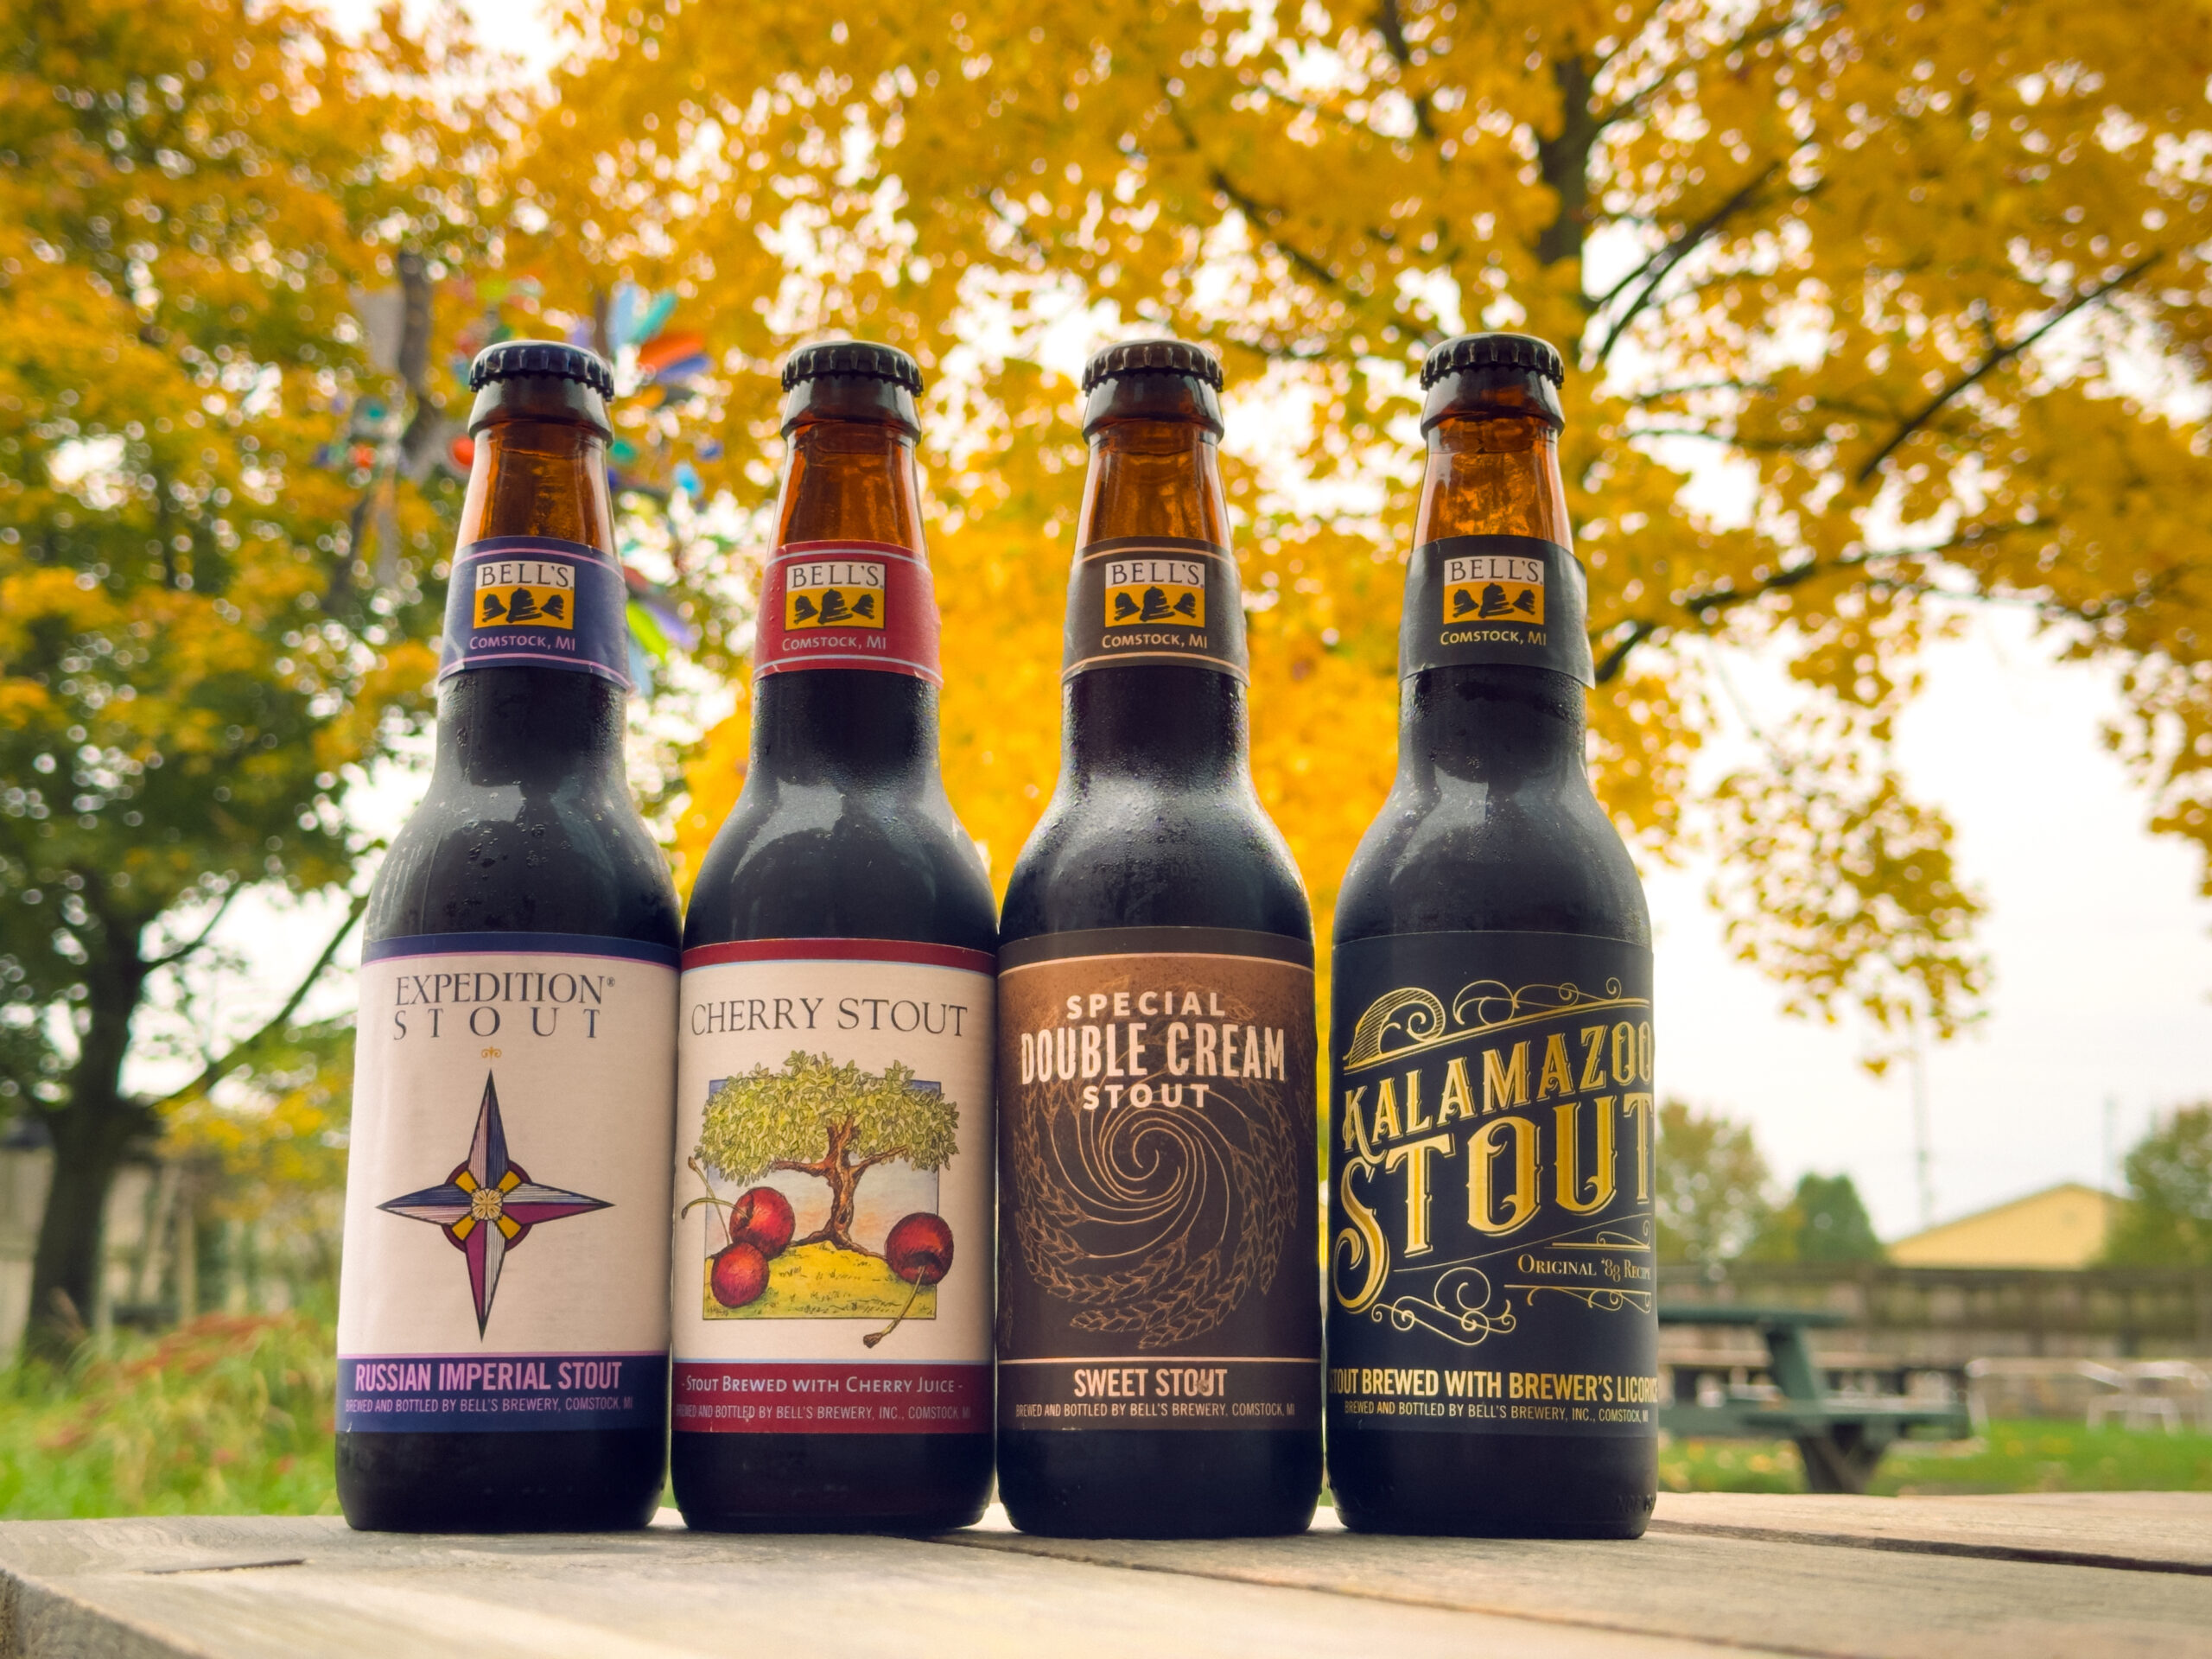 Bottles of Kalamazoo Stout, Cherry Stout, Double Cream Stout and Expedition Stout on a bench in front of fall foilage